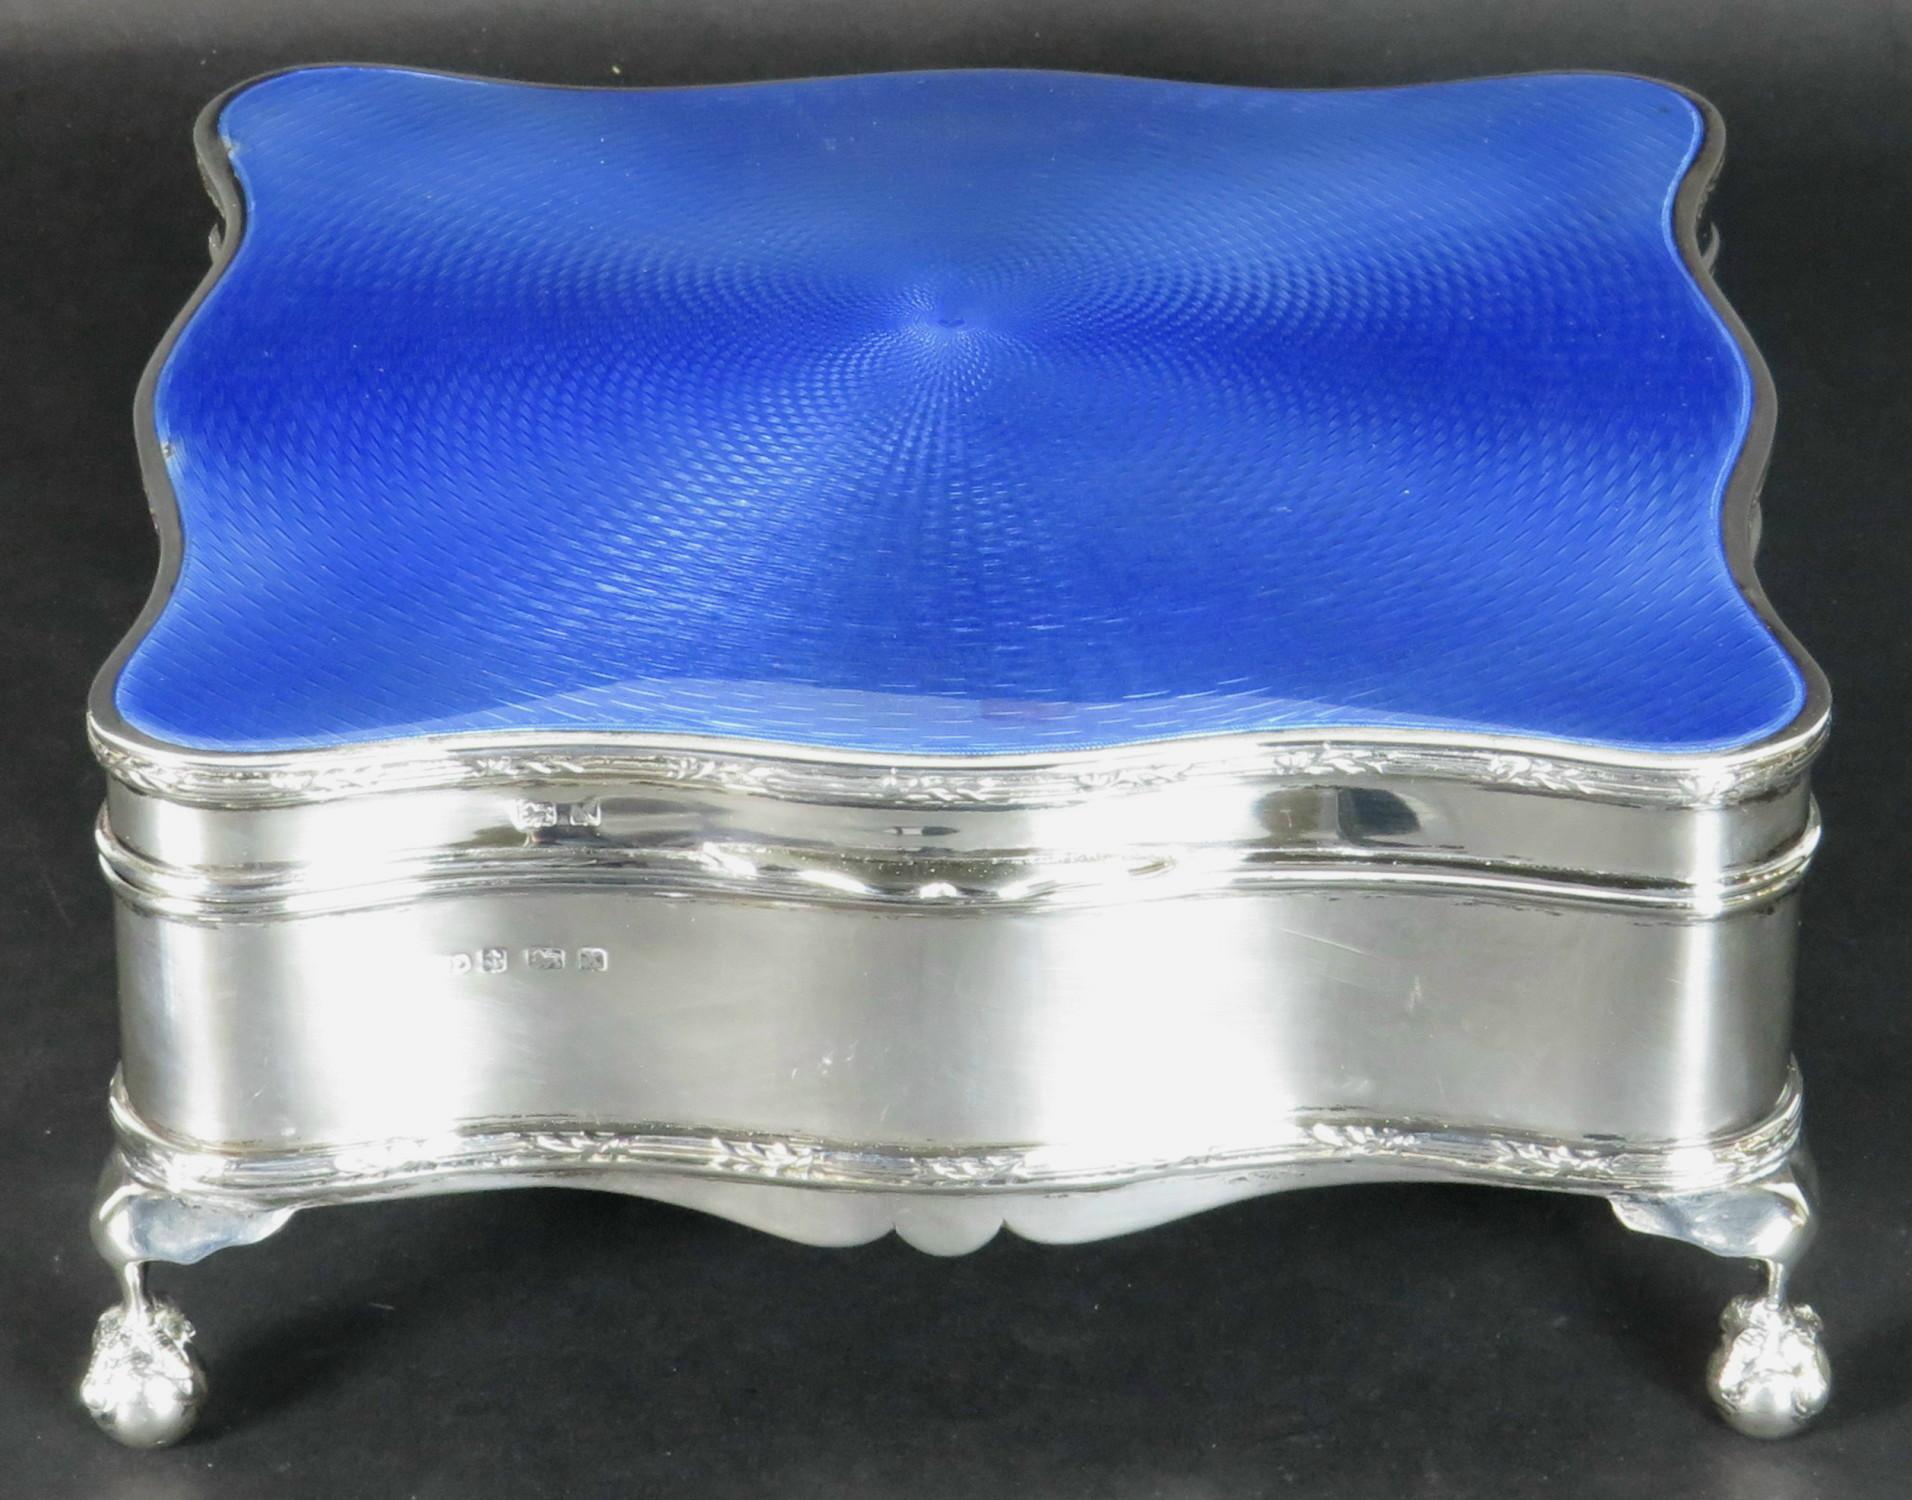 A fine and exceptionally large English Art Deco sterling silver & enamel jewelery box. The serpentine-shaped case fitted with a conforming hinged lid decorated in striking powder-blue enamel with radiating interwoven machined motifs, opening to an